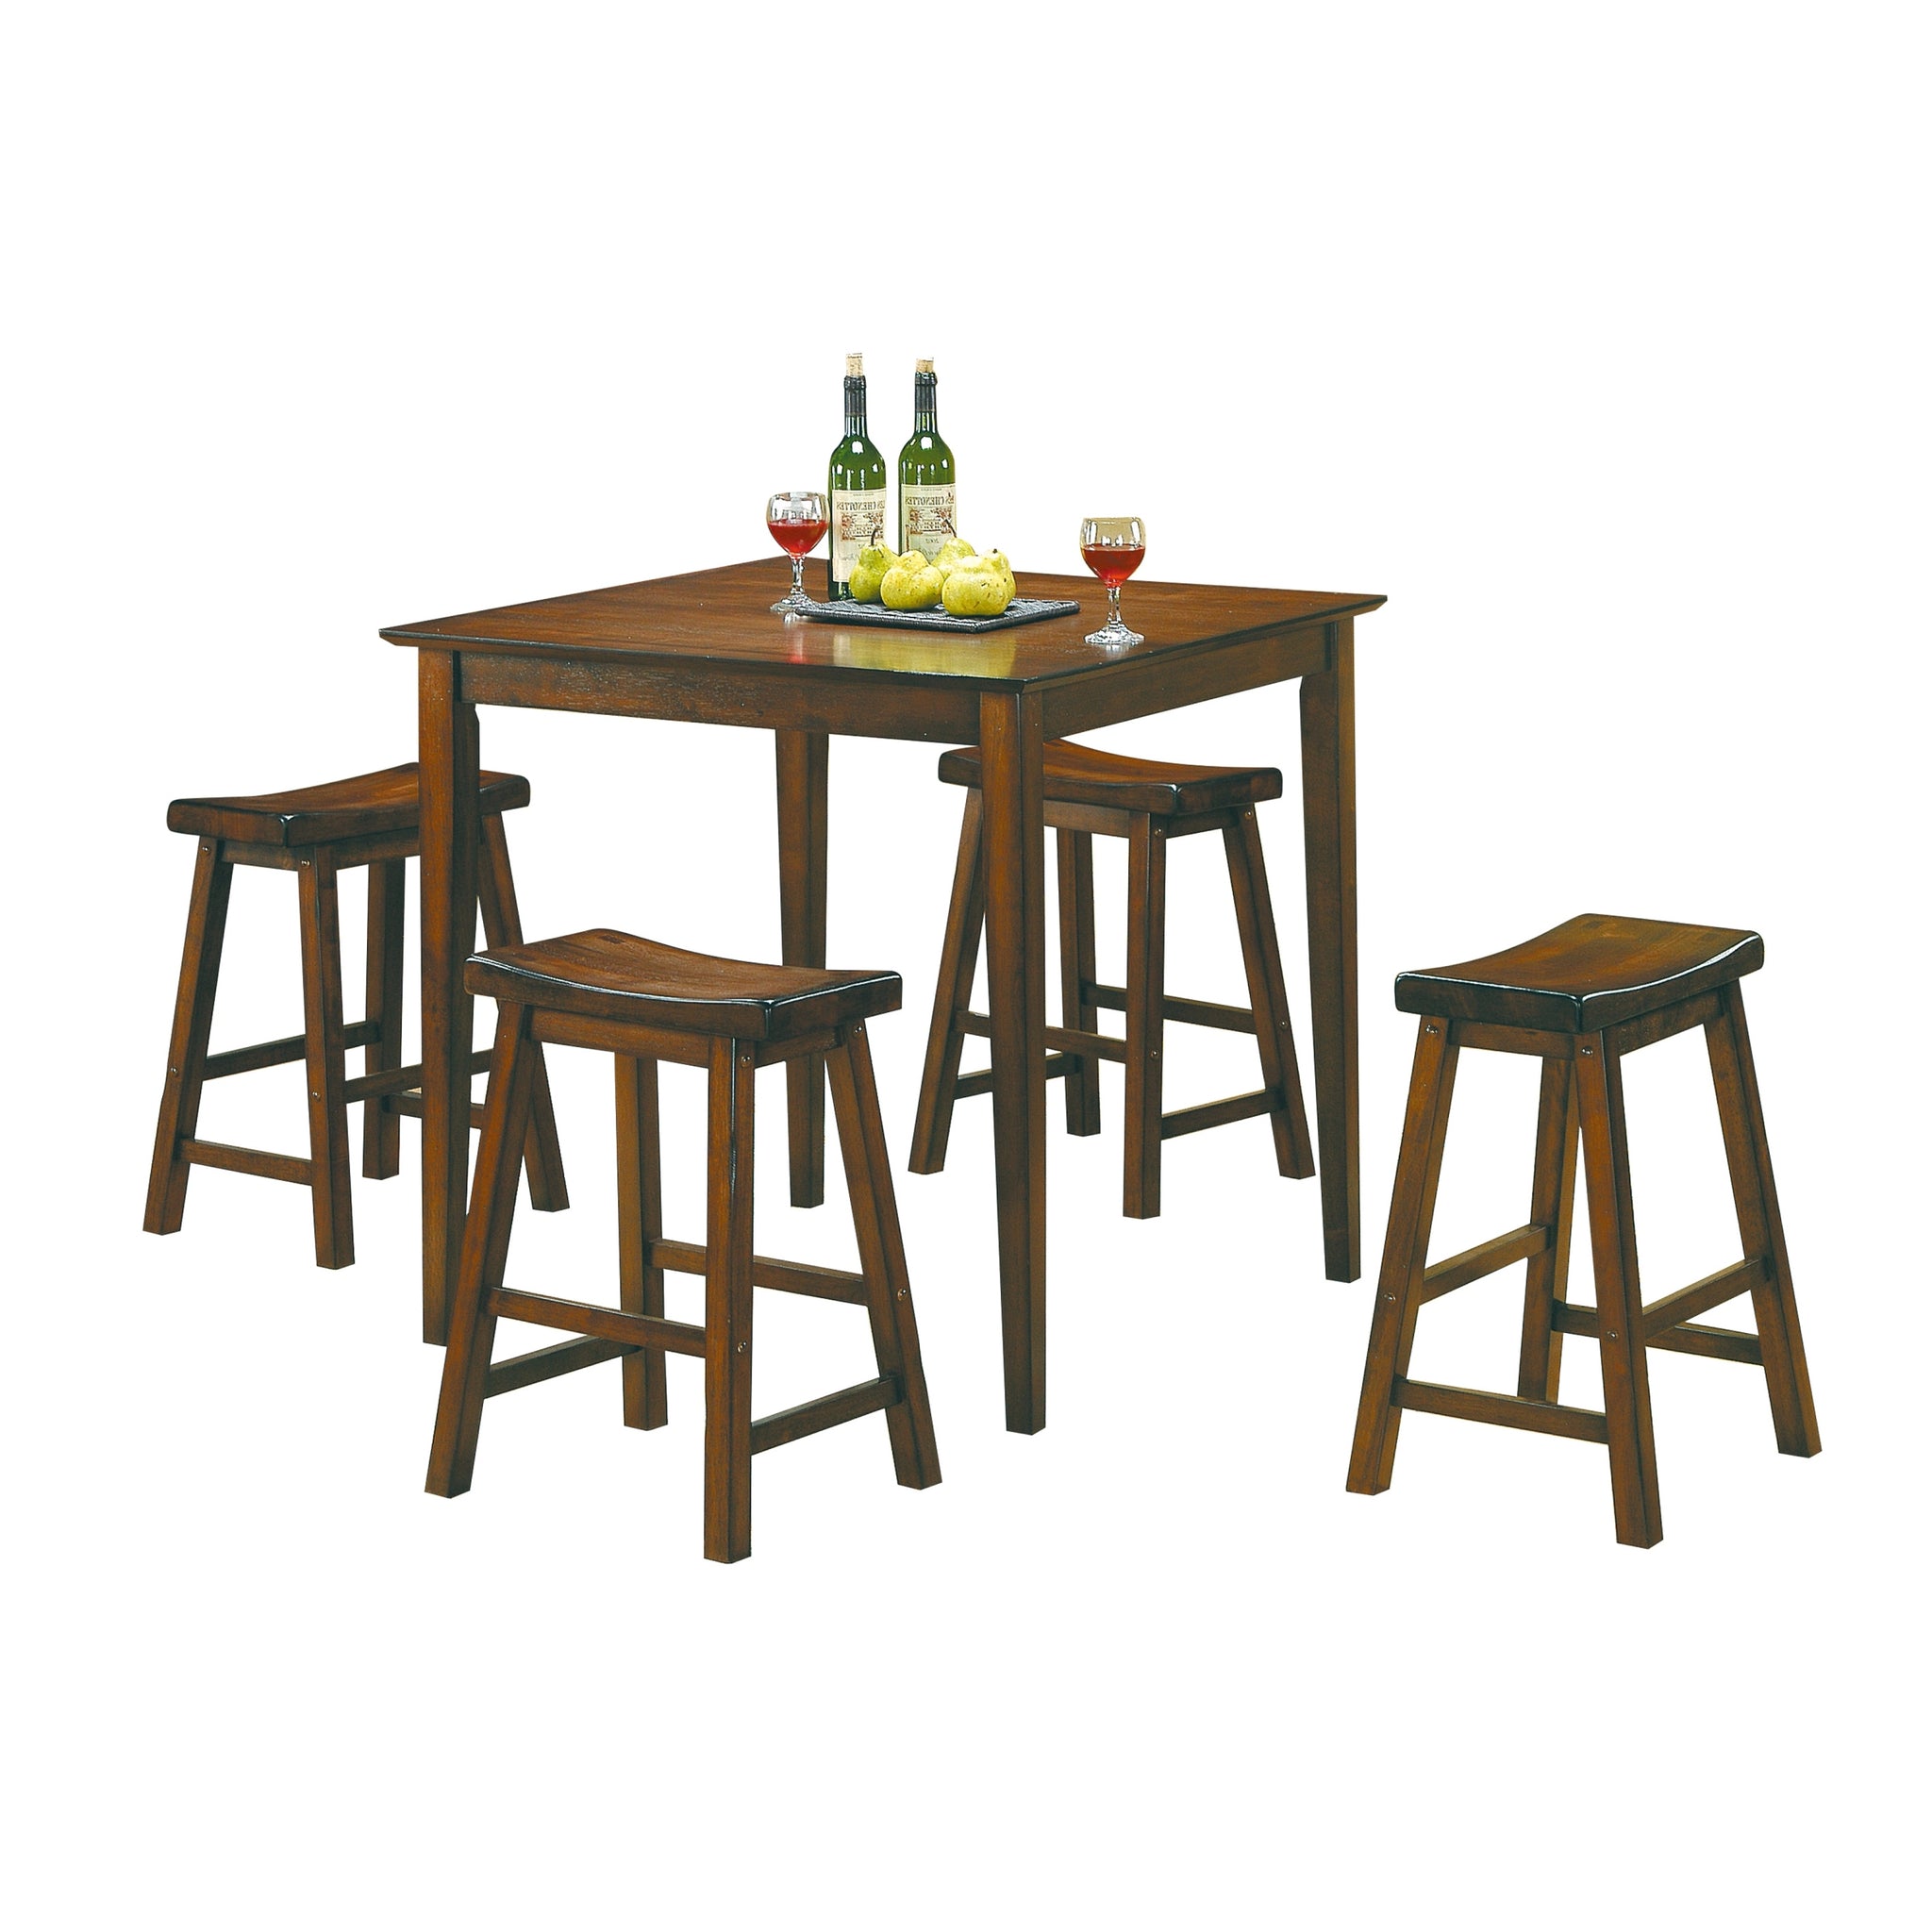 29 inch Bar Height Stools 2pc Set Saddle Seat Solid brown mix-dining room-wood